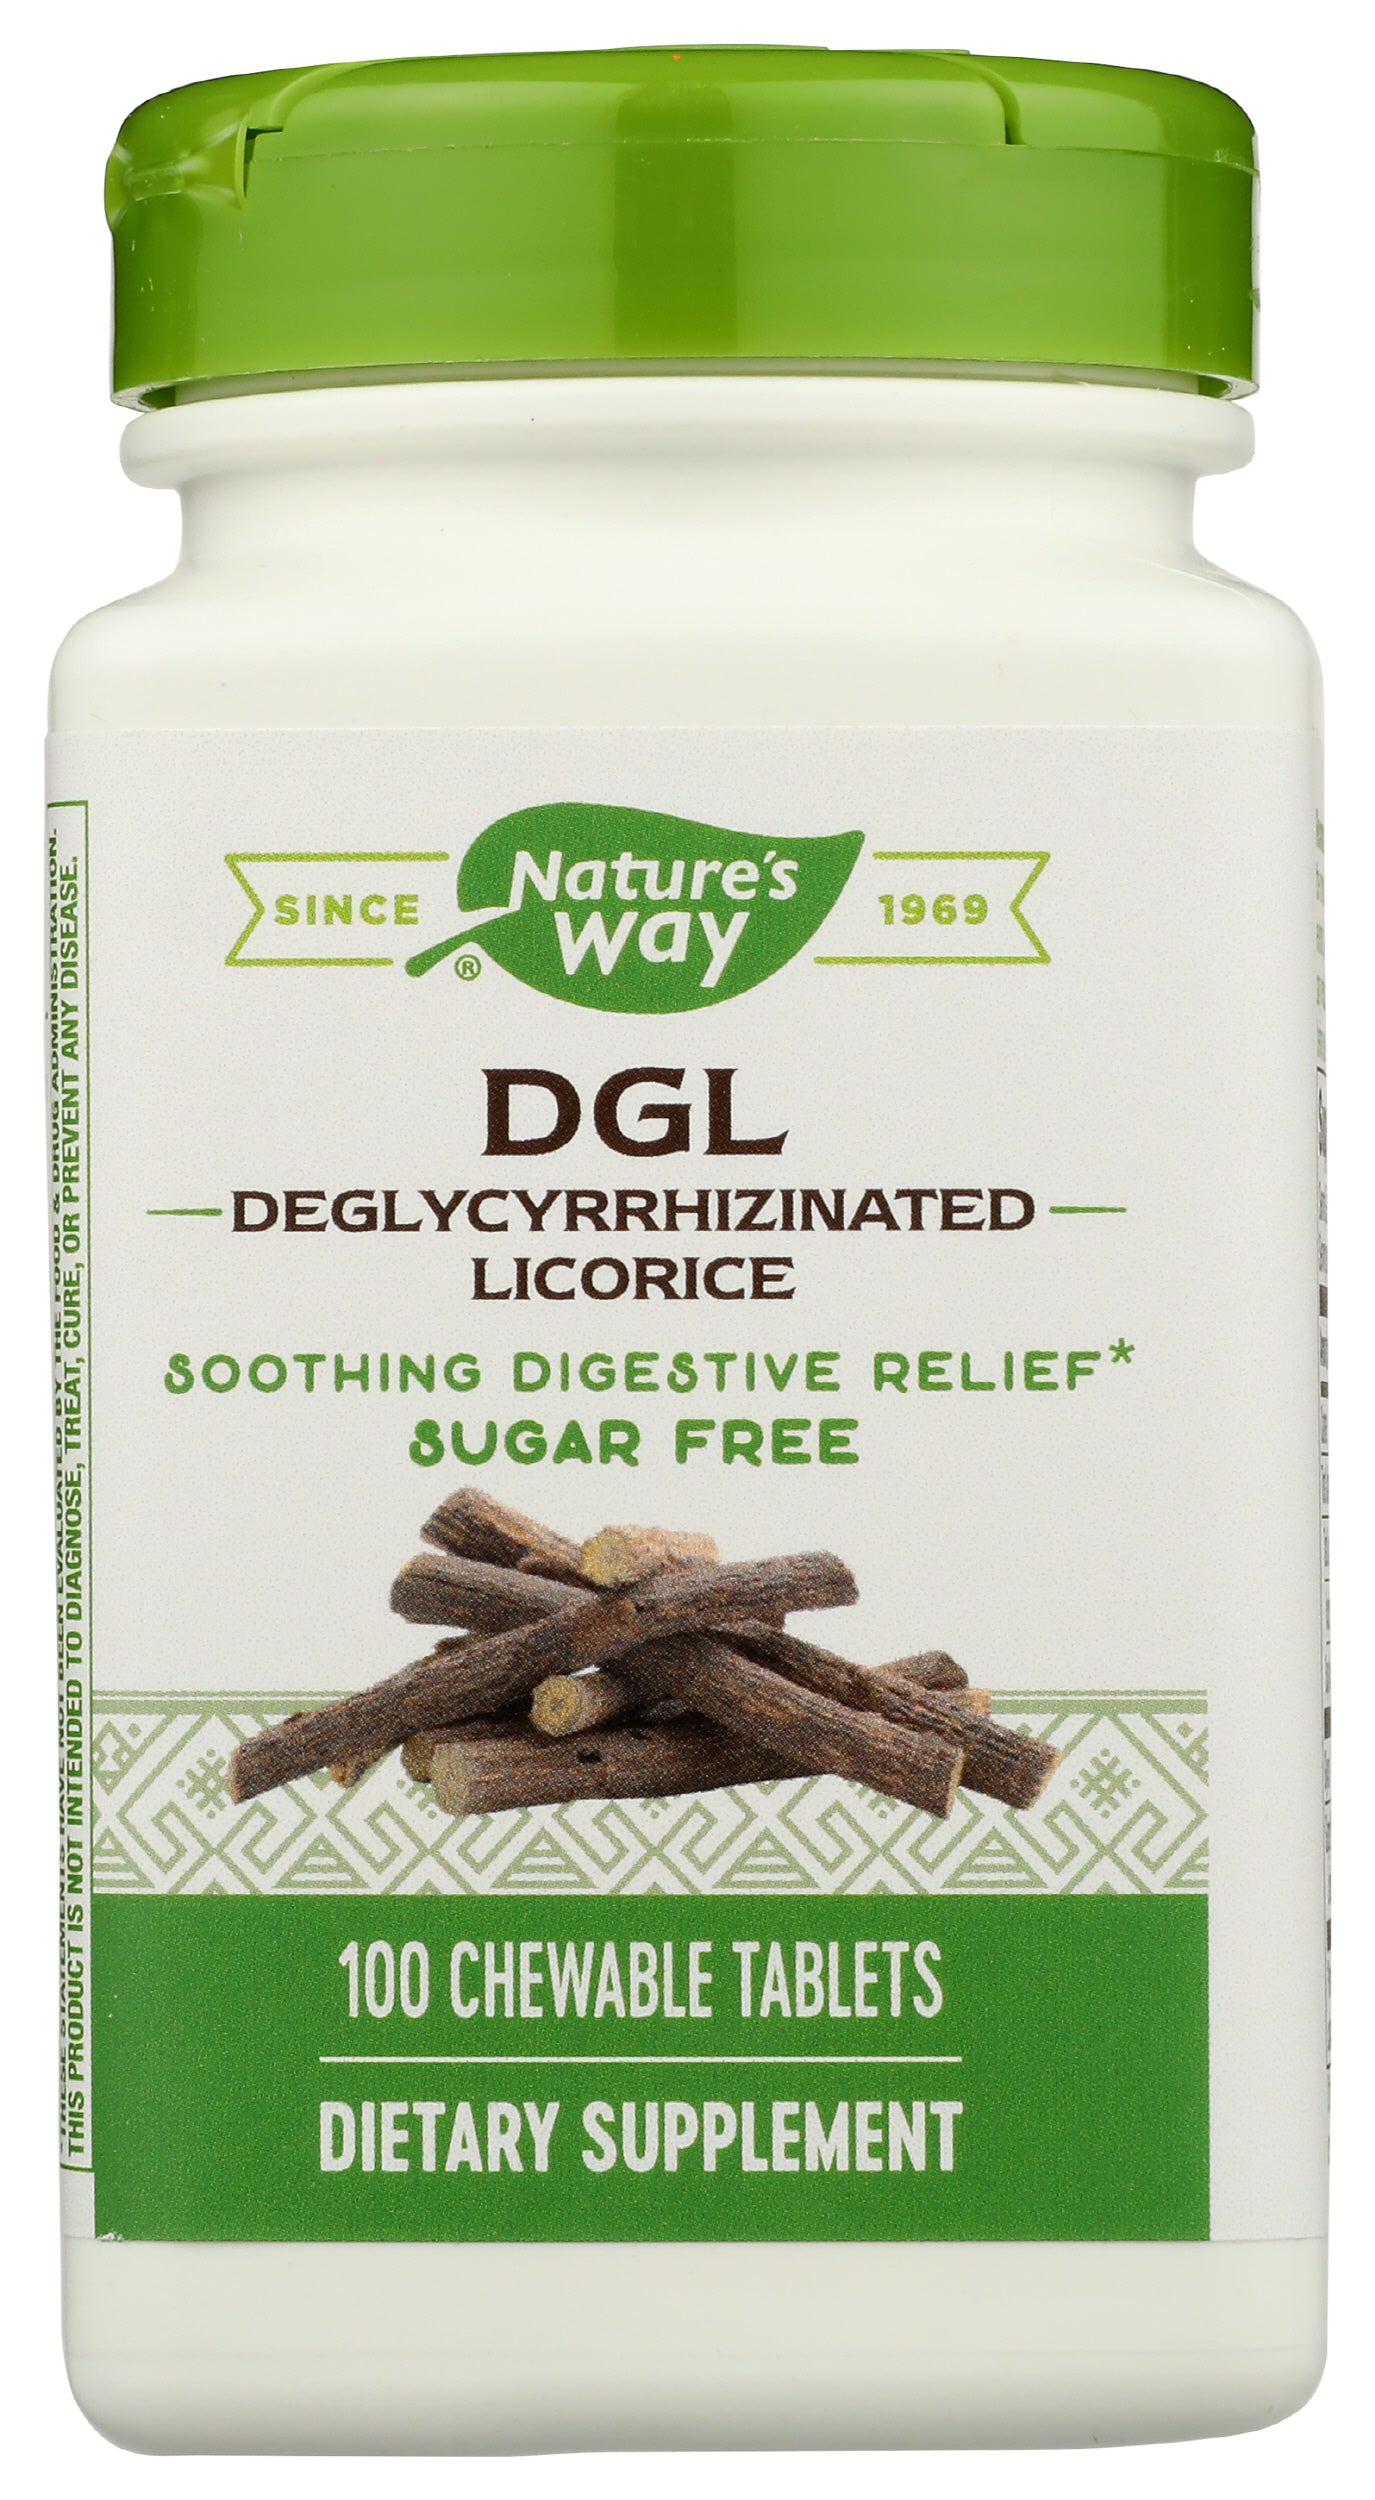 Nature's Way DGL Deglycyrrhizinated Licorice 100 Chewable Tablets Front